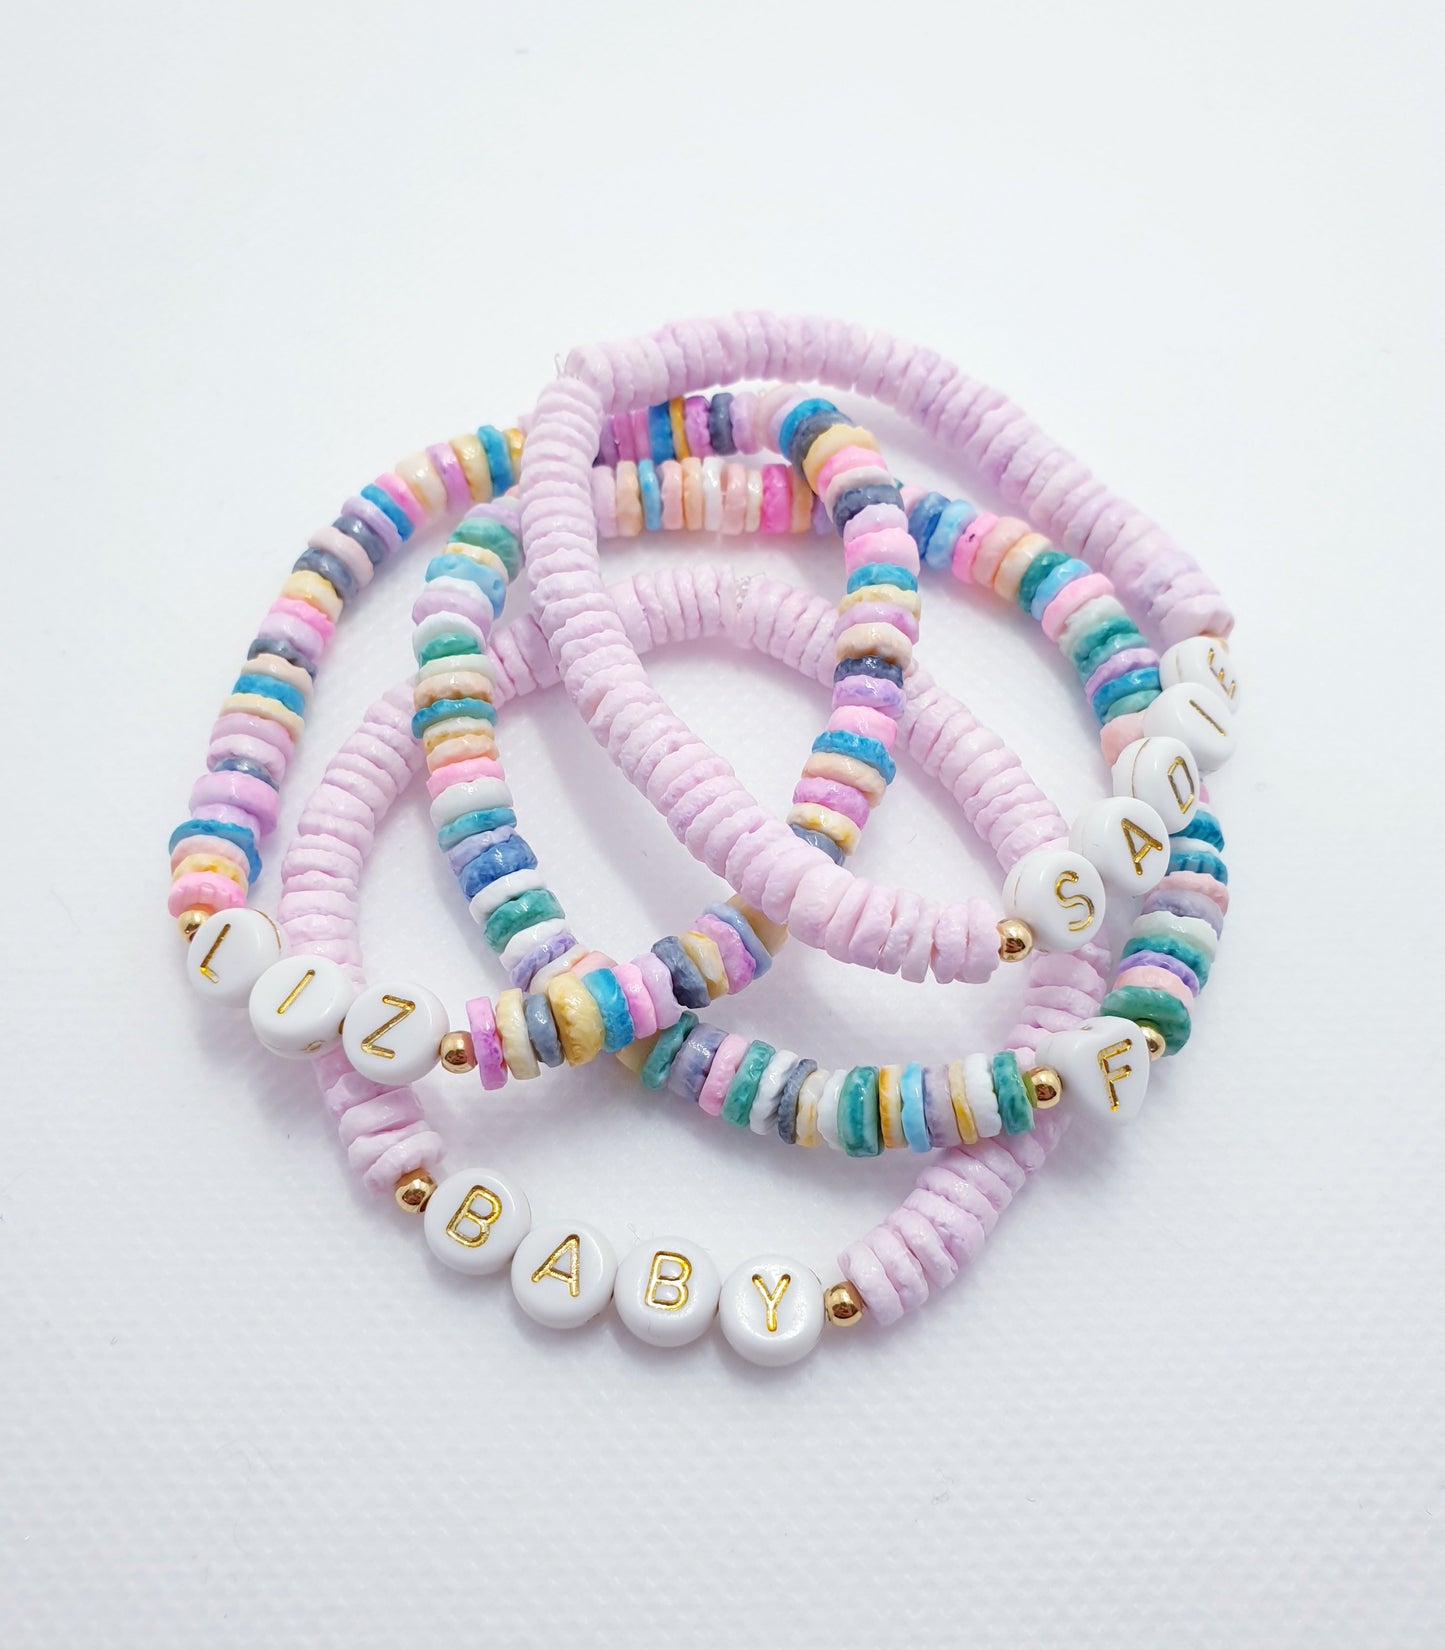 Personalised Beaded Name Bracelet - Nacreous Stamp Beads a.k.a EYE CANDY